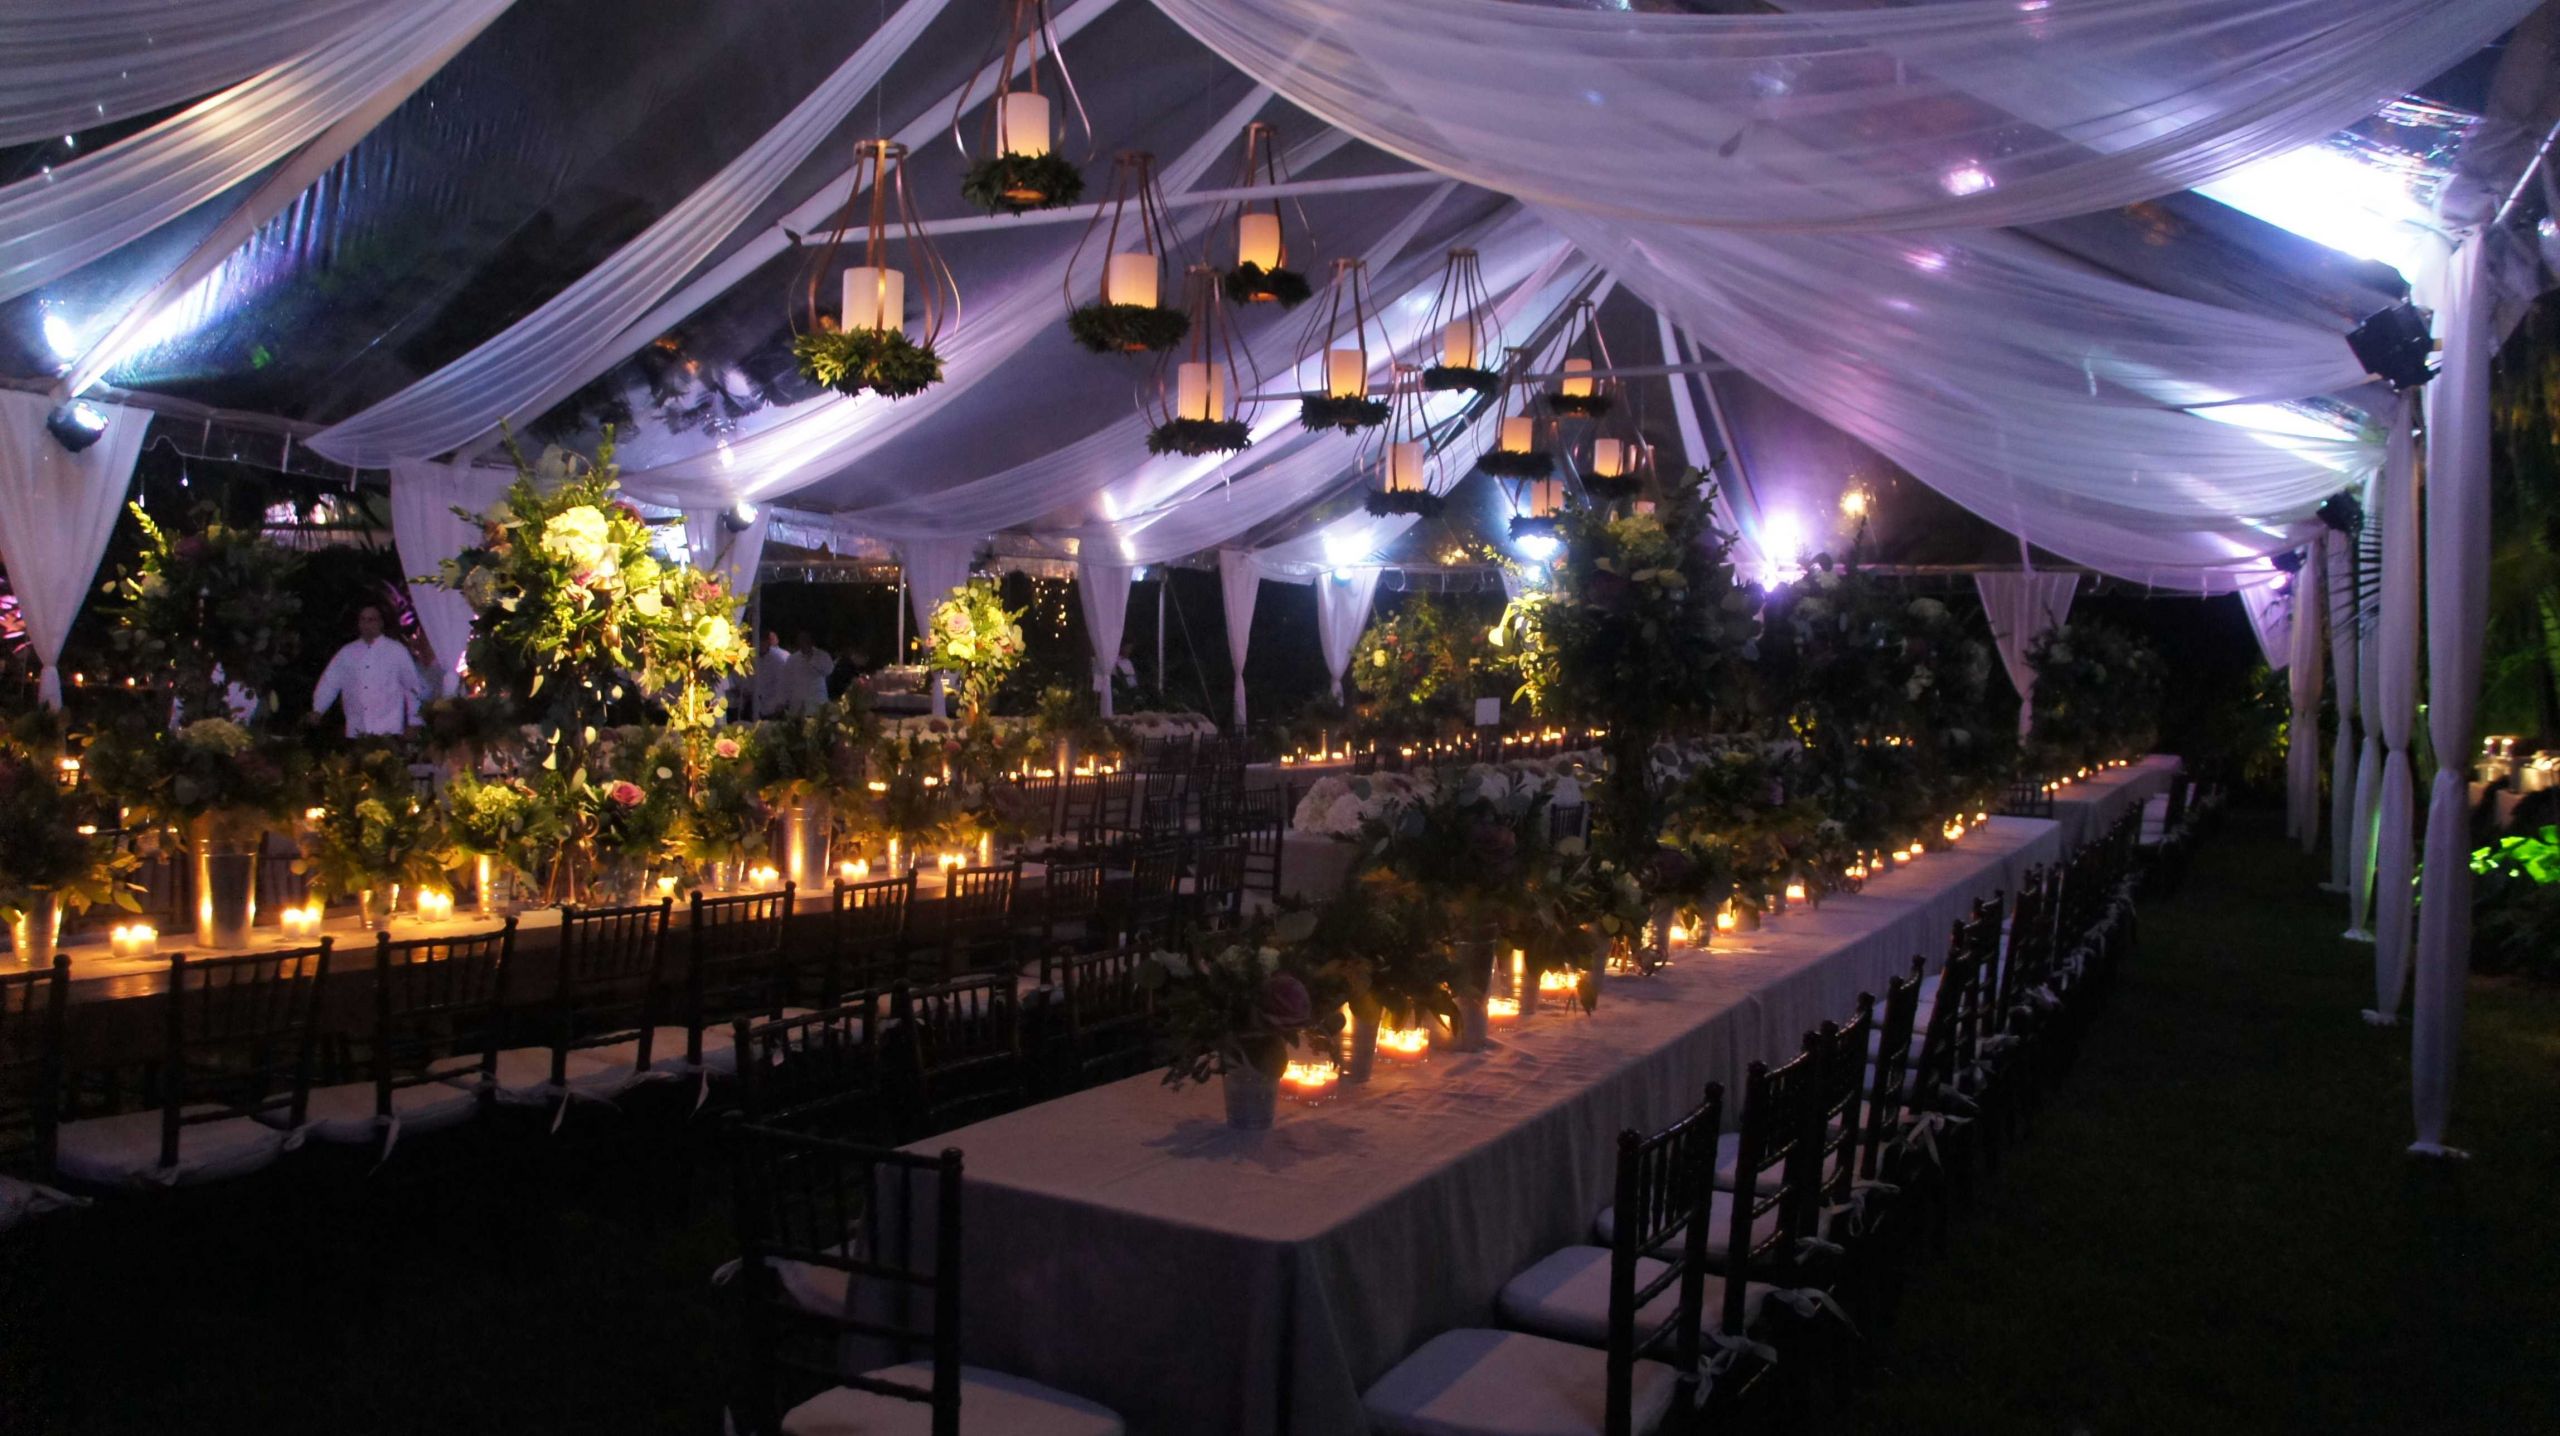 Backyard Lighting Ideas For A Party
 9 Great Party Tent Lighting Ideas For Outdoor Events